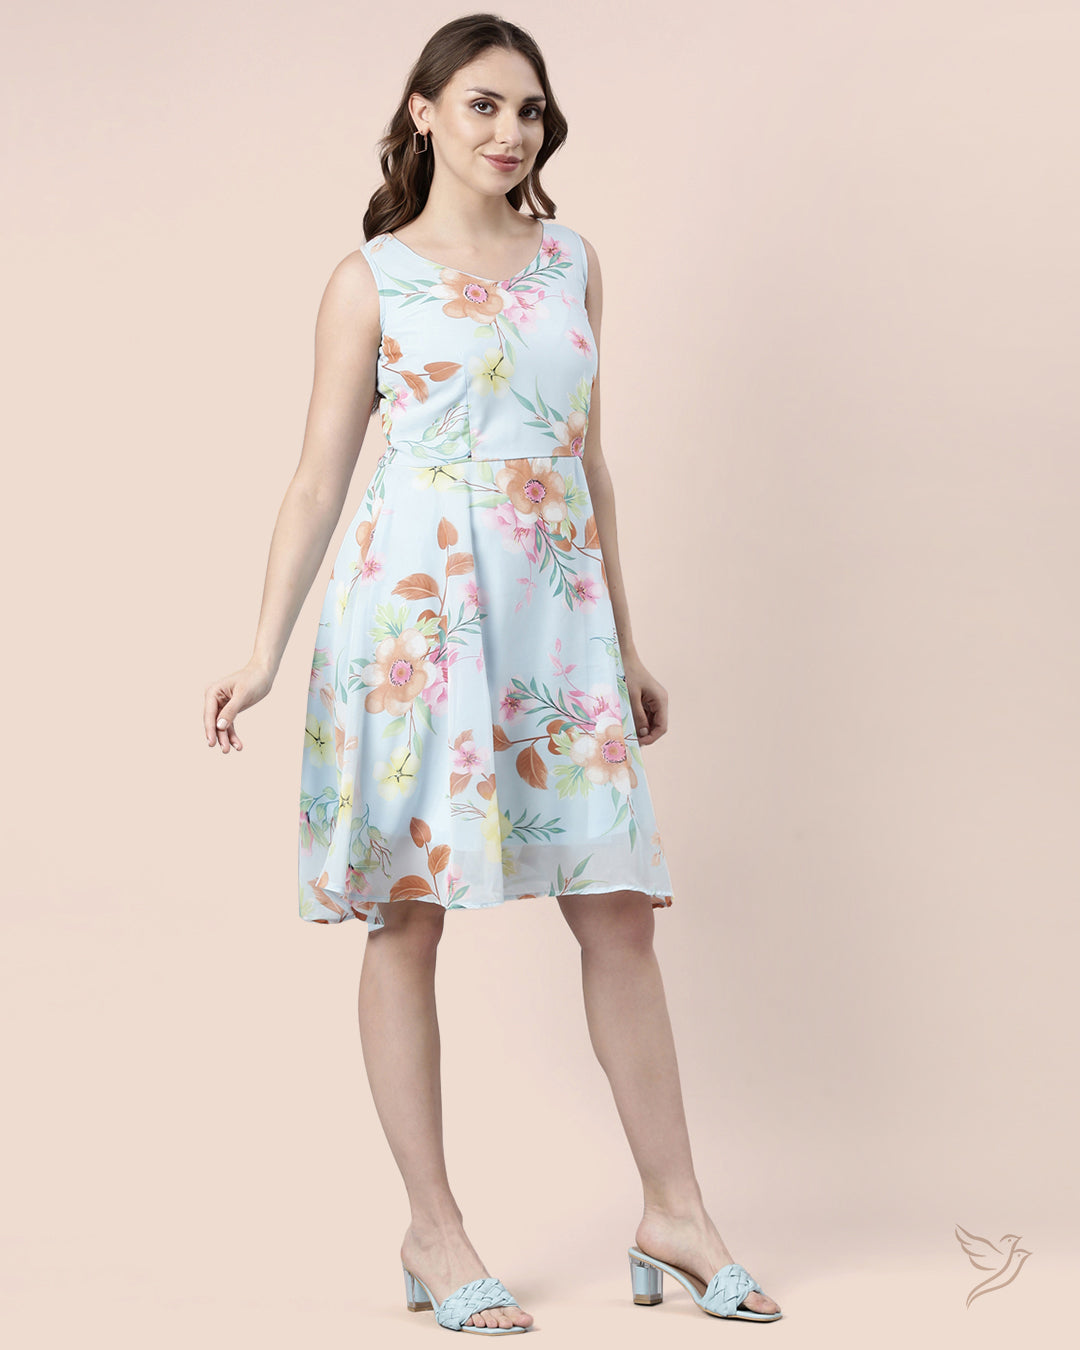 Baby Blue Floral Printed Sleeveless Georgette Dress for Women